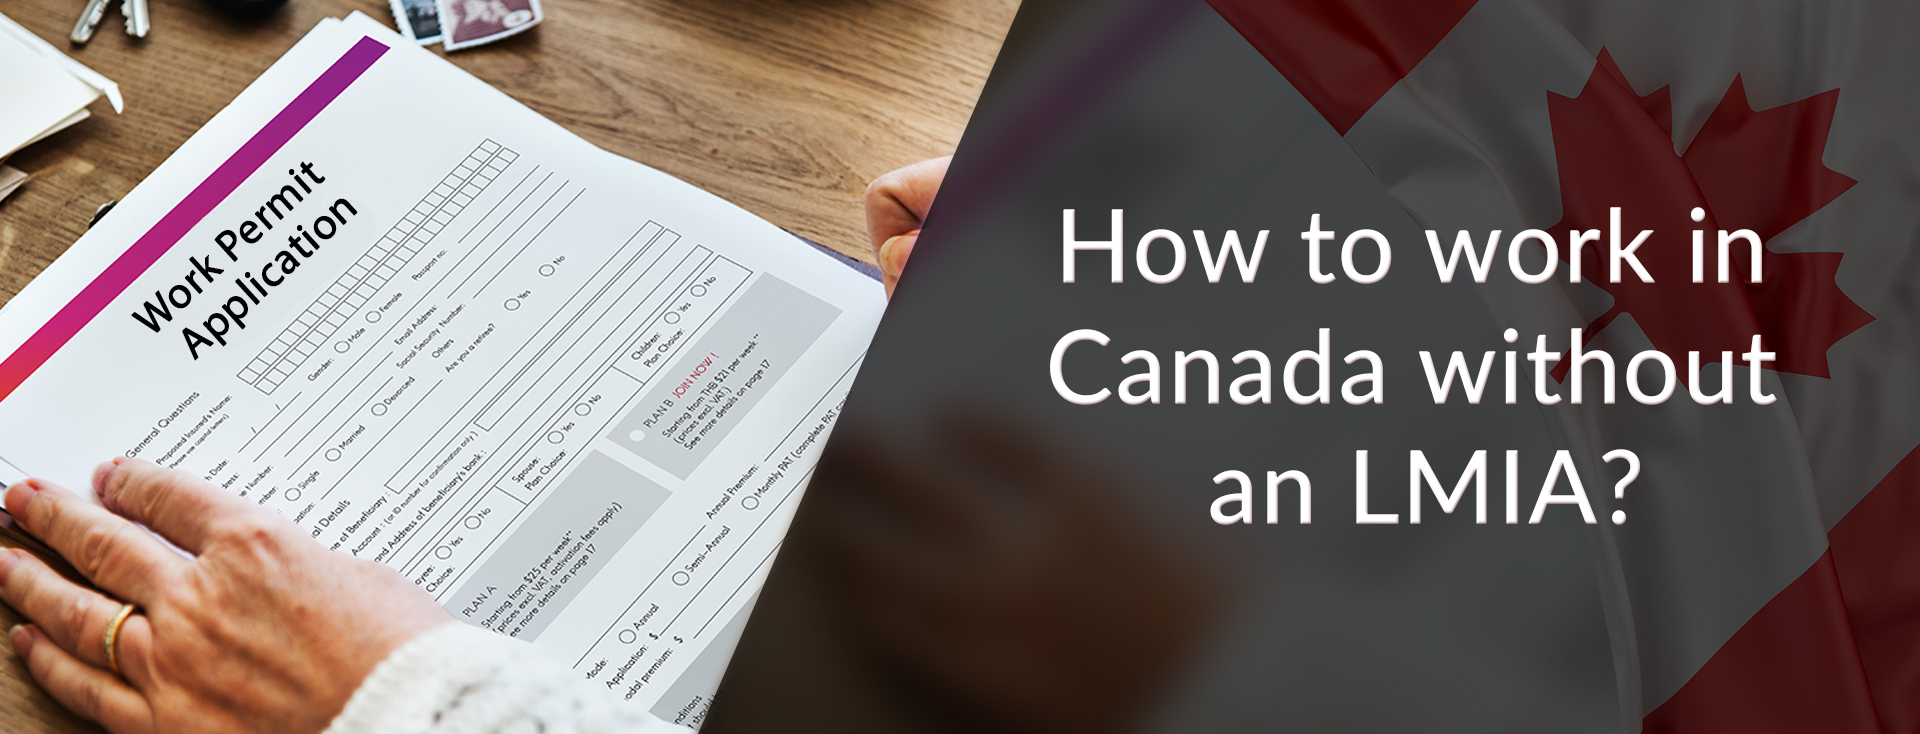 How to work in Canada without an LMIA